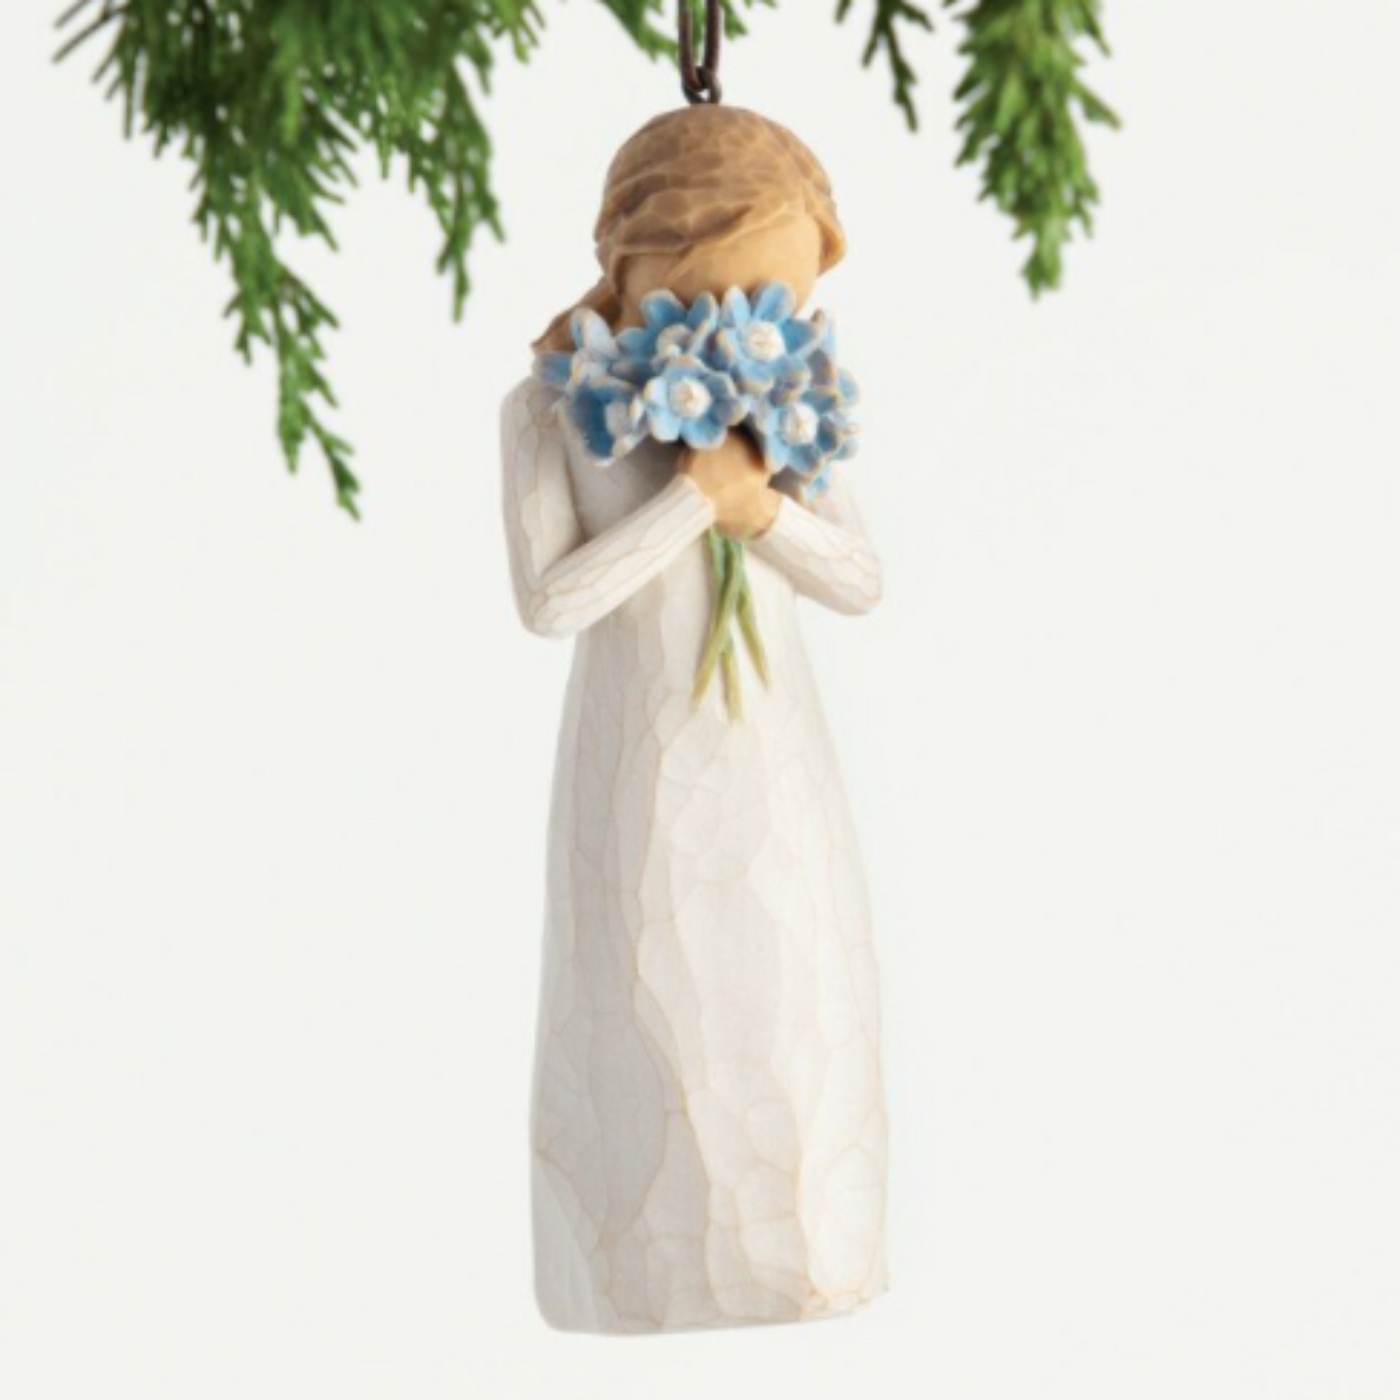 Forget Me Not Ornament